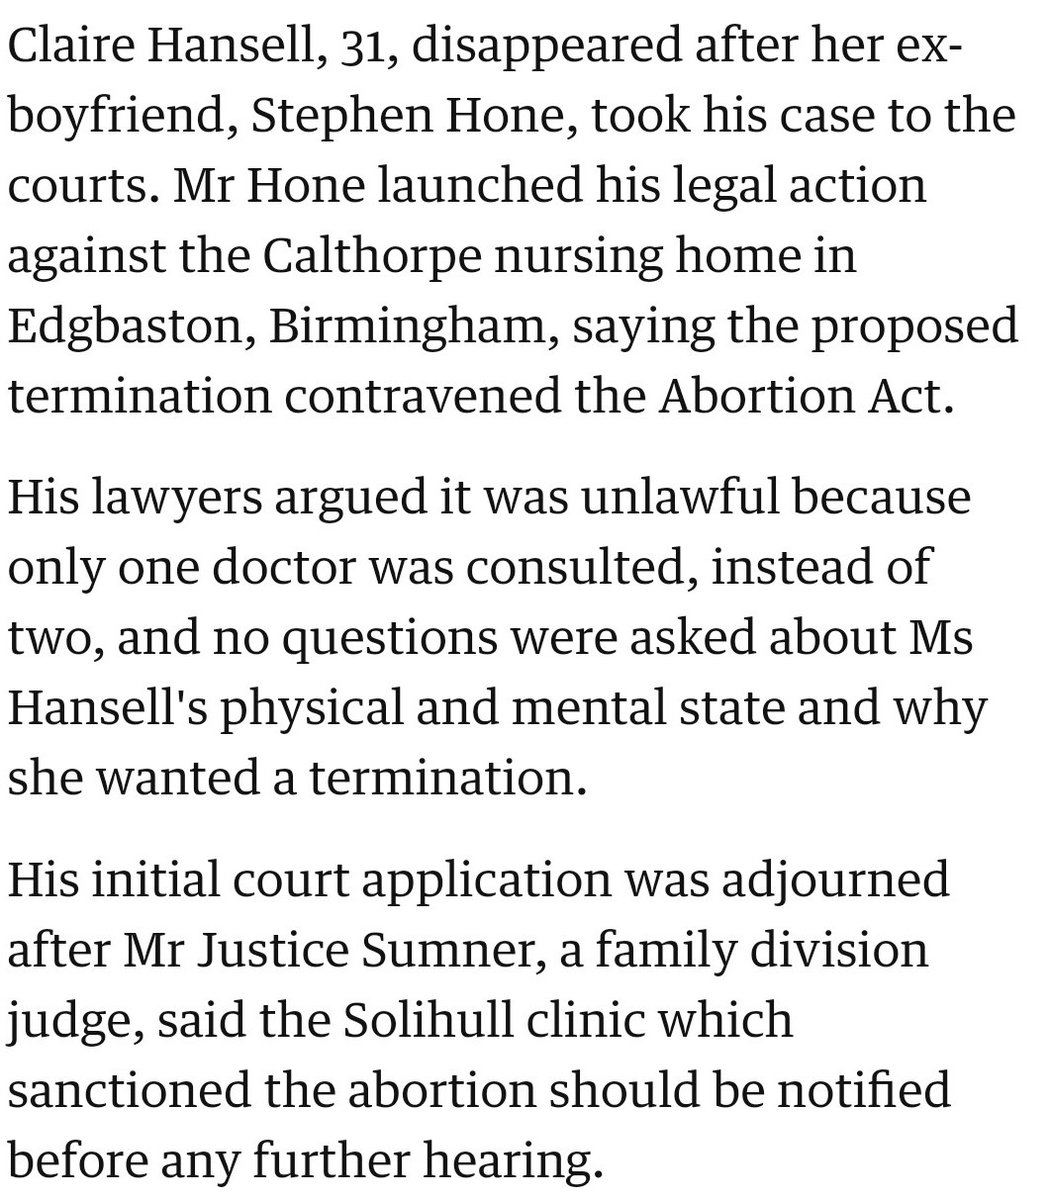 Conrathe has run a number of other cases challenging abortion rights on the basis consent was not given properly or consent cannot be given by someone under 18.Stephen Hone argued via Conrathe his ex-girlfriend could not consent because her mental state was not examined.